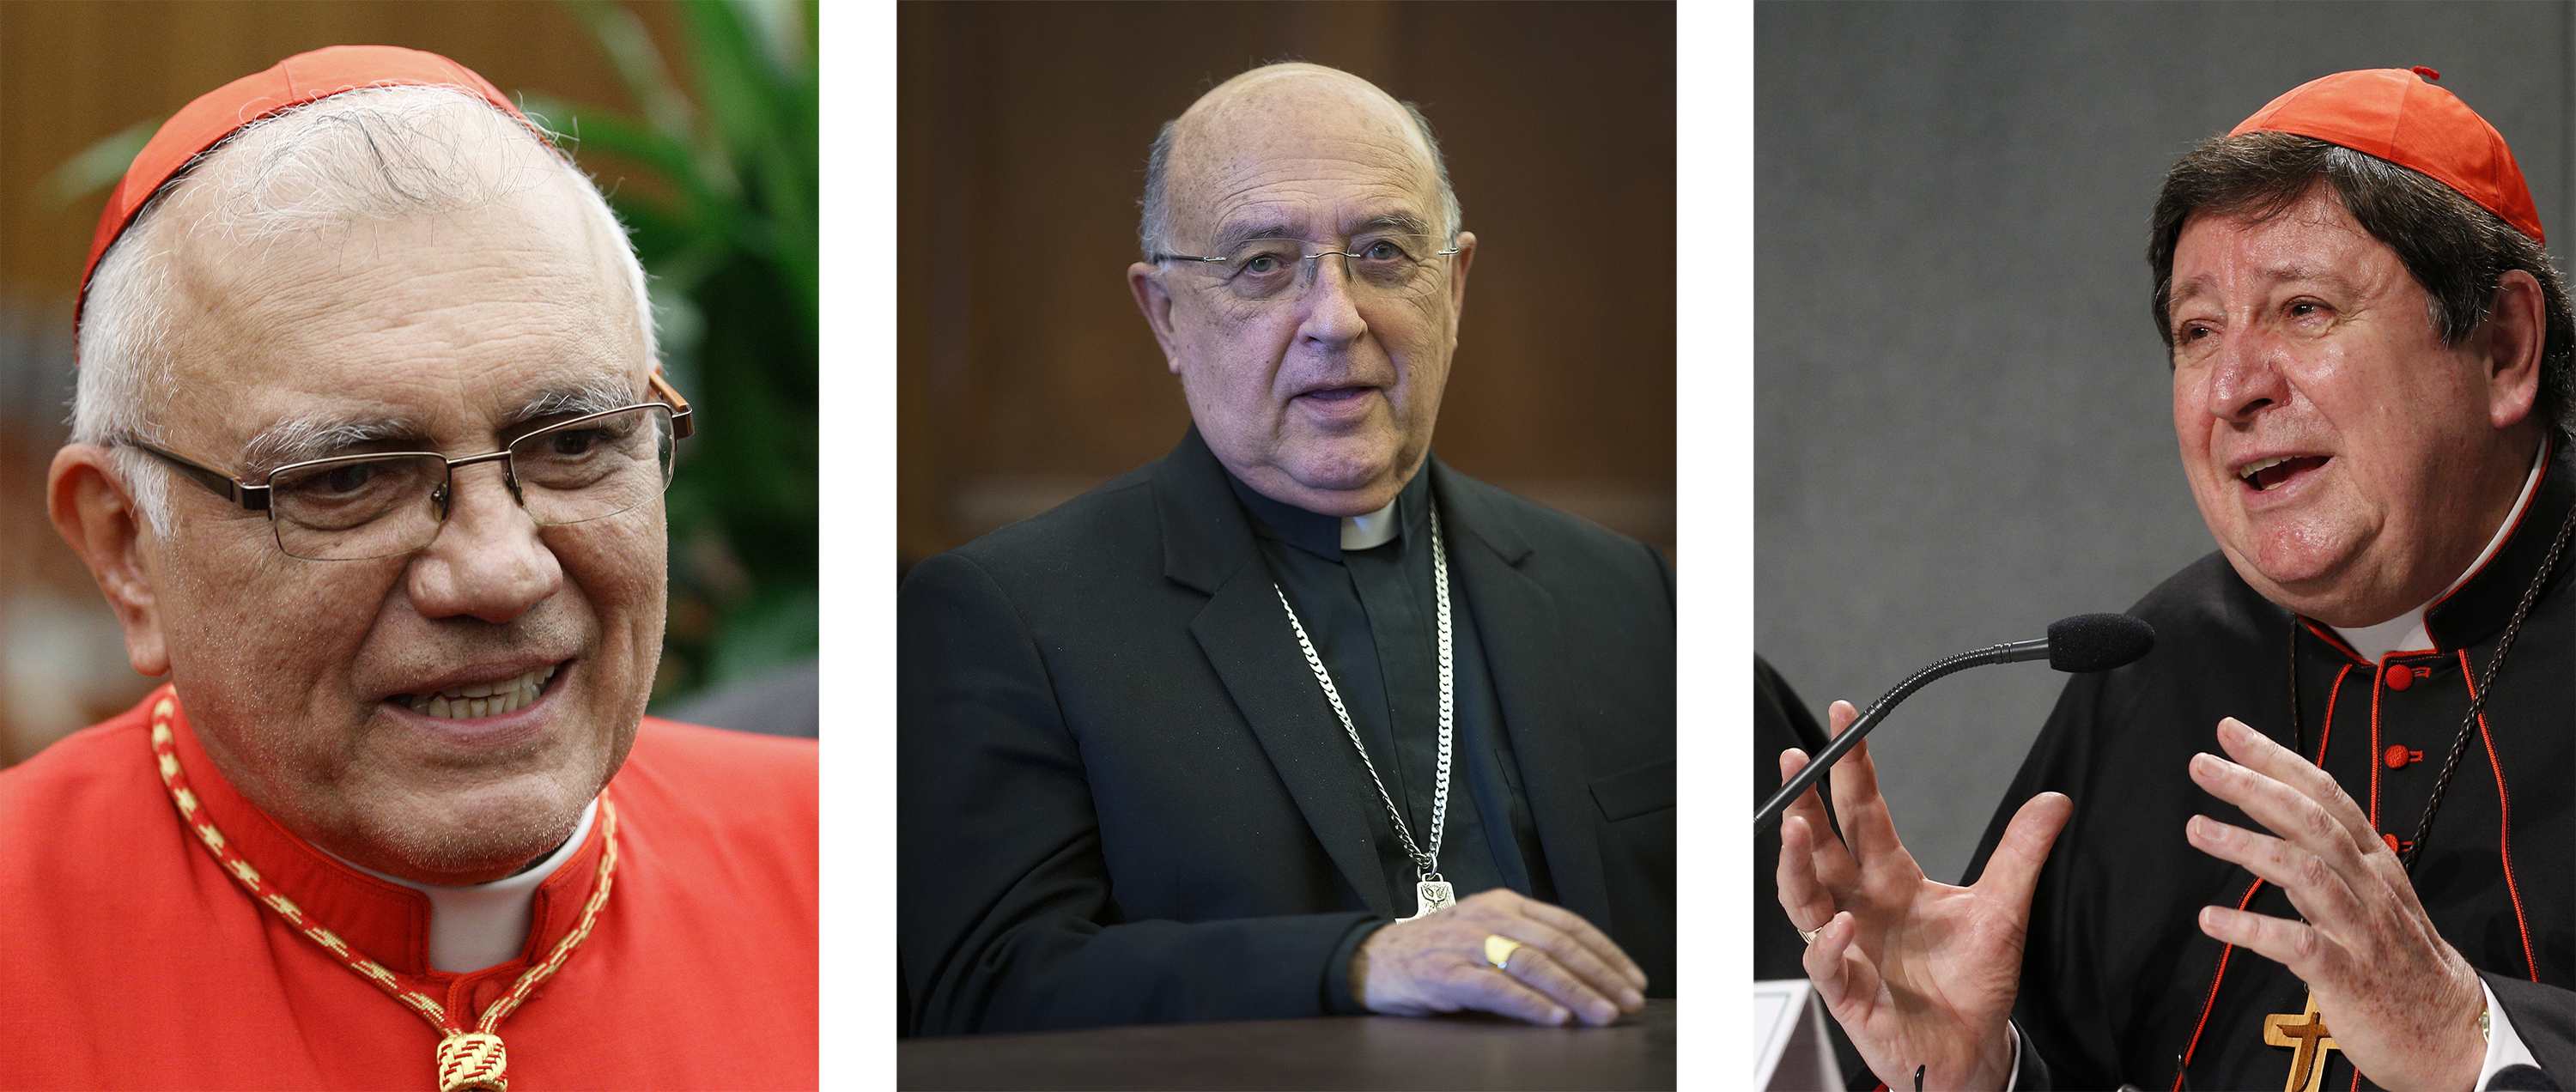 Pope appoints three cardinals to help lead synod on Amazon